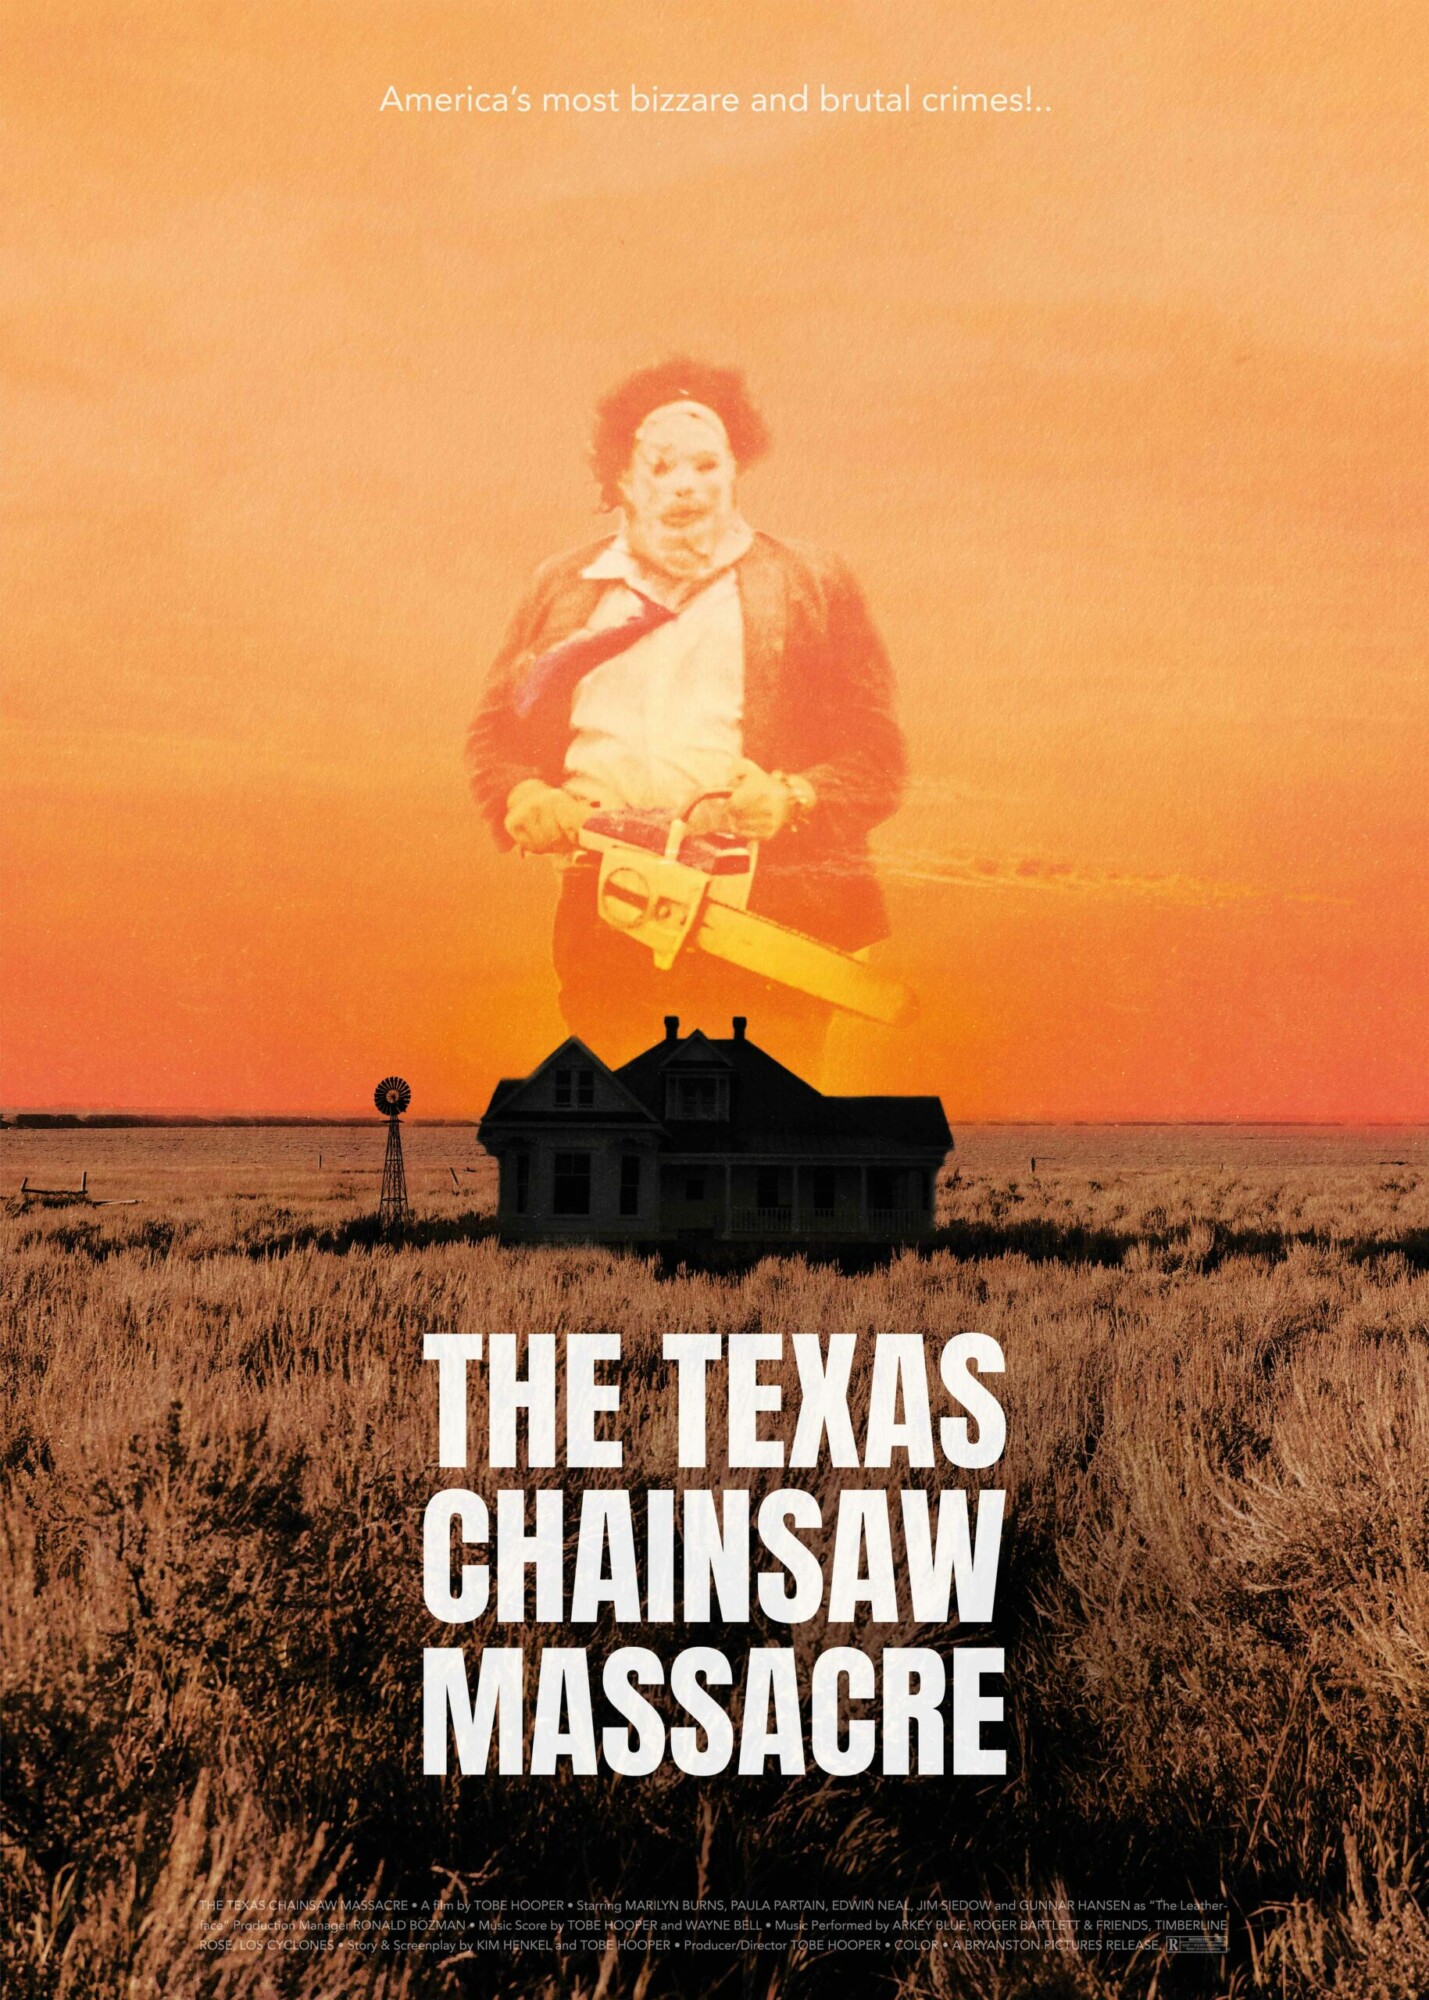 Poster work for “The Texas Chainsaw Massacre” (1974)